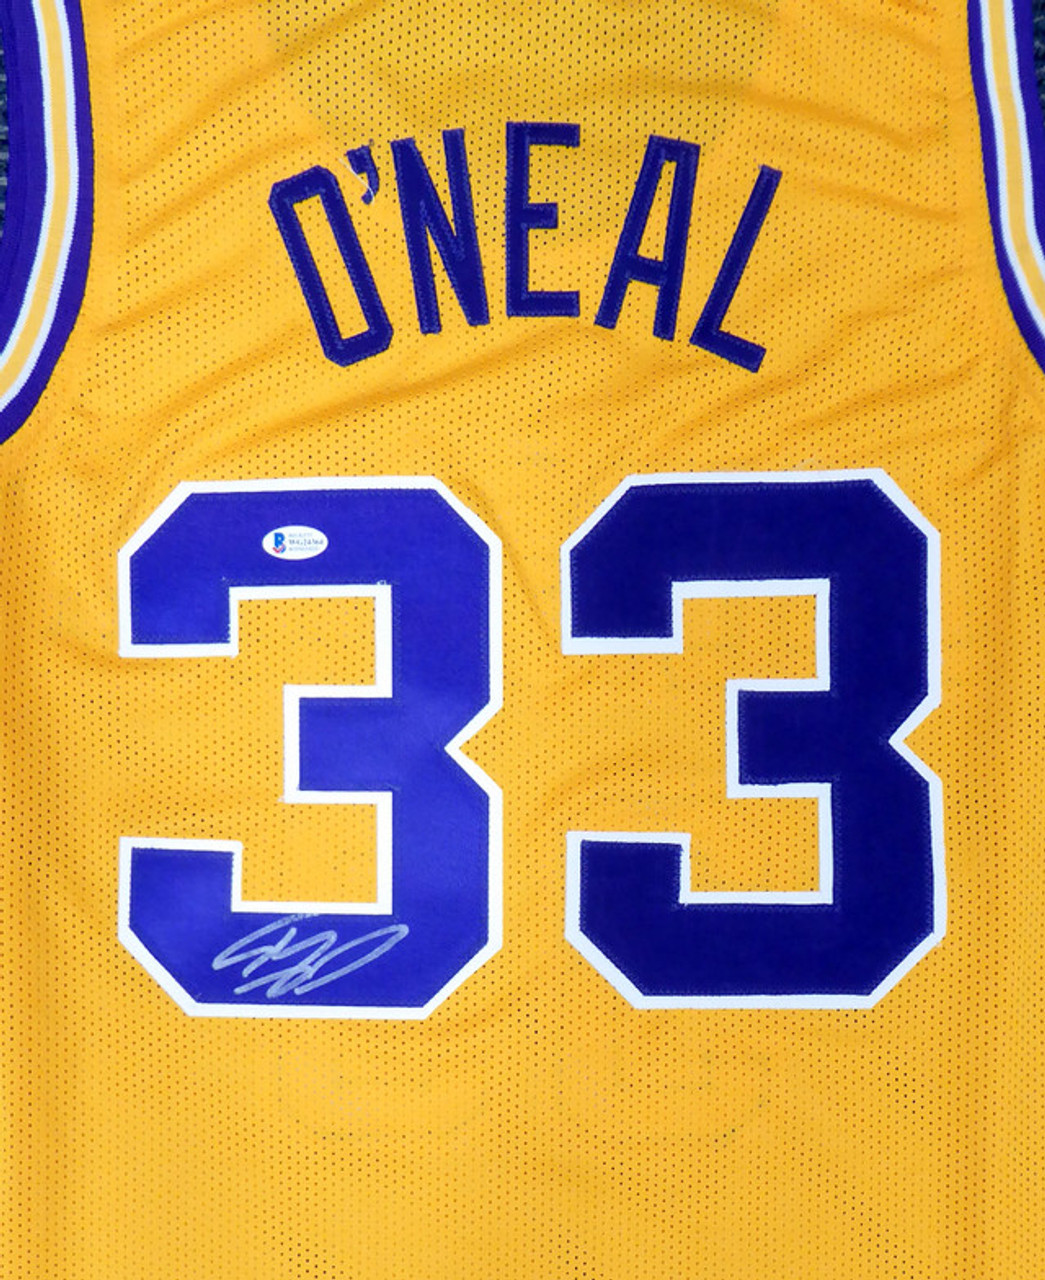 Orlando Magic Shaquille Shaq O'Neal Autographed Blue Jersey Signed